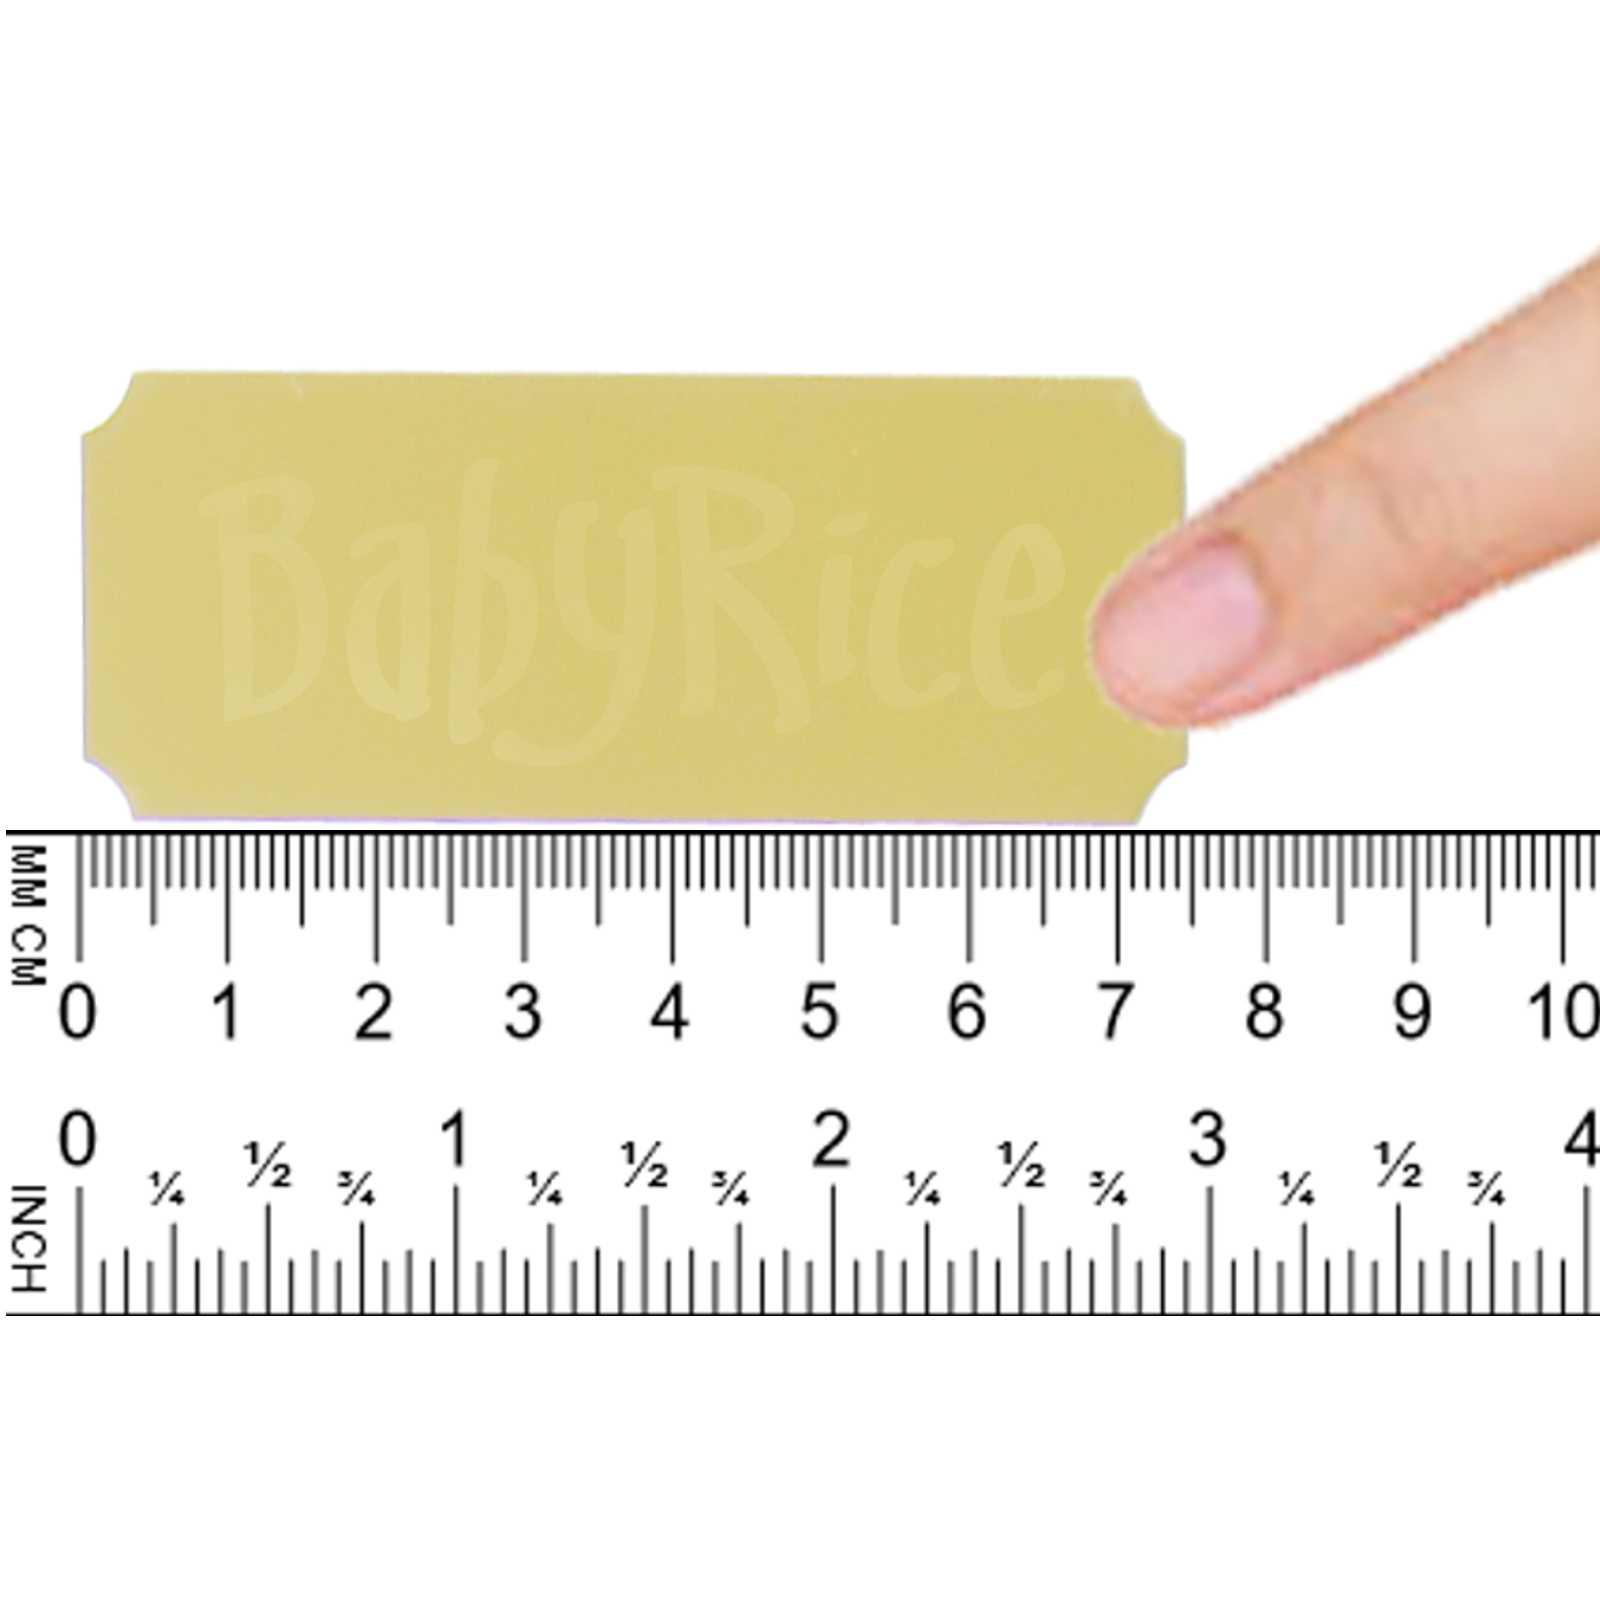 Gold Rectangle Plaque Scalloped Edges 75x30mm / 3x1.2” inch - Blank